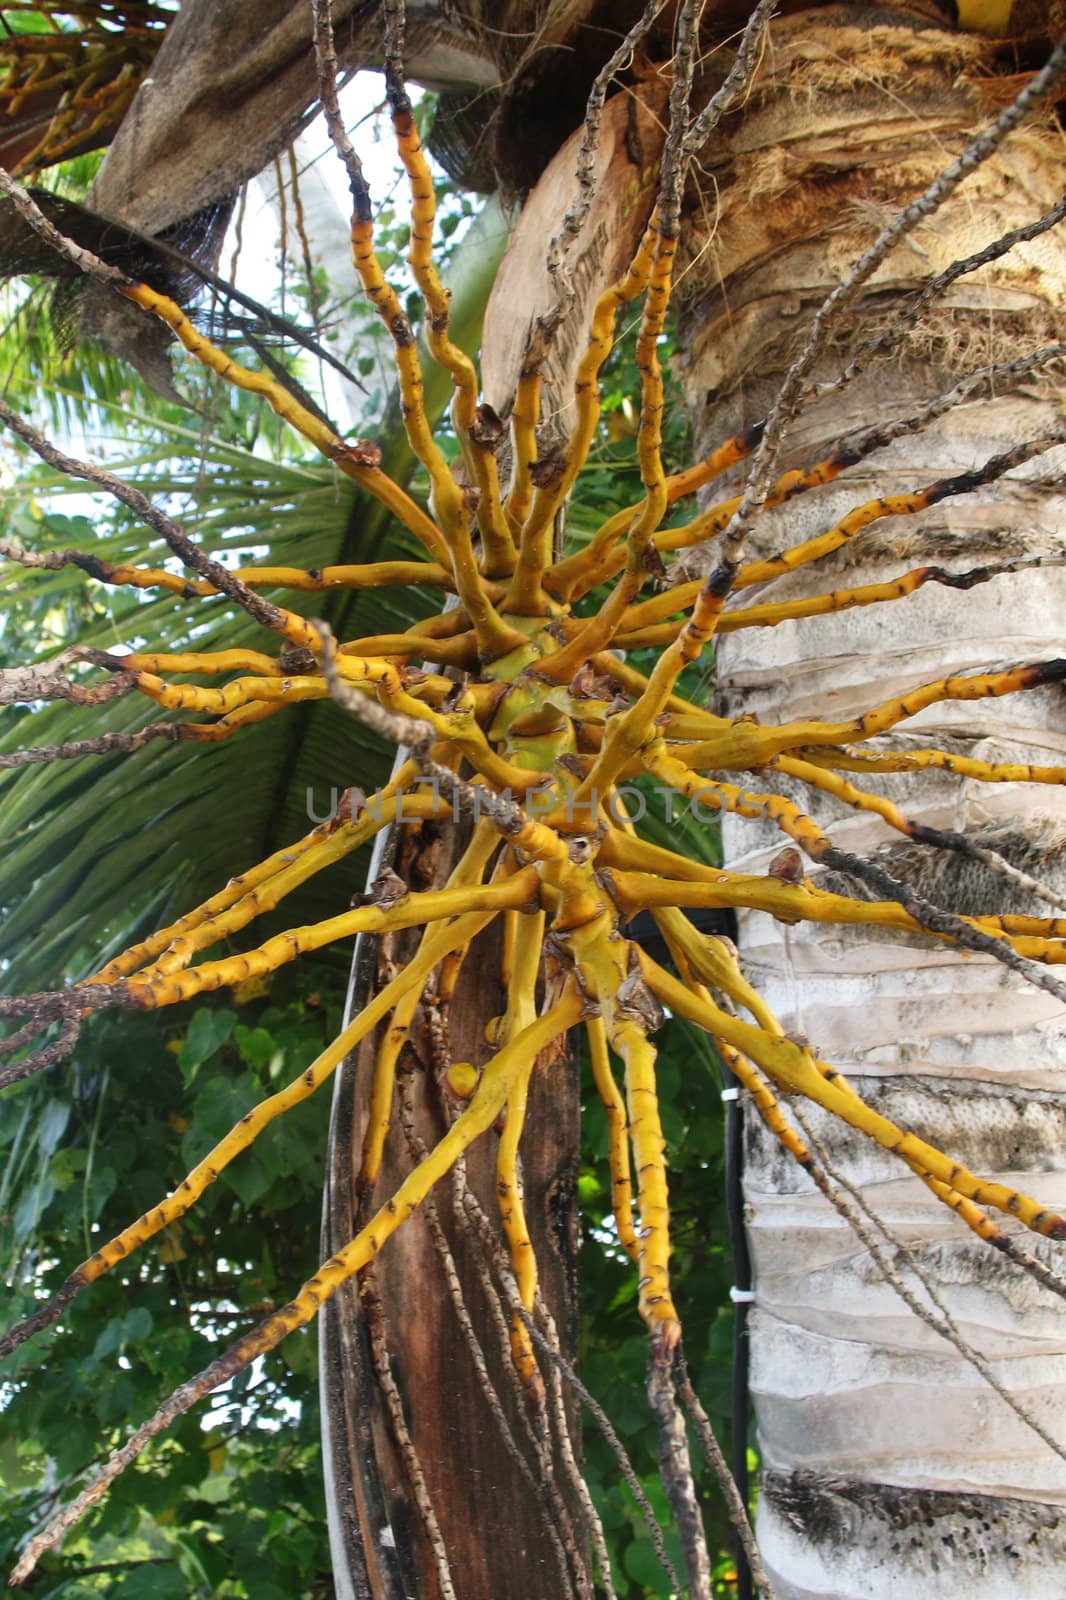 Empty peduncle of kimri palm after storm